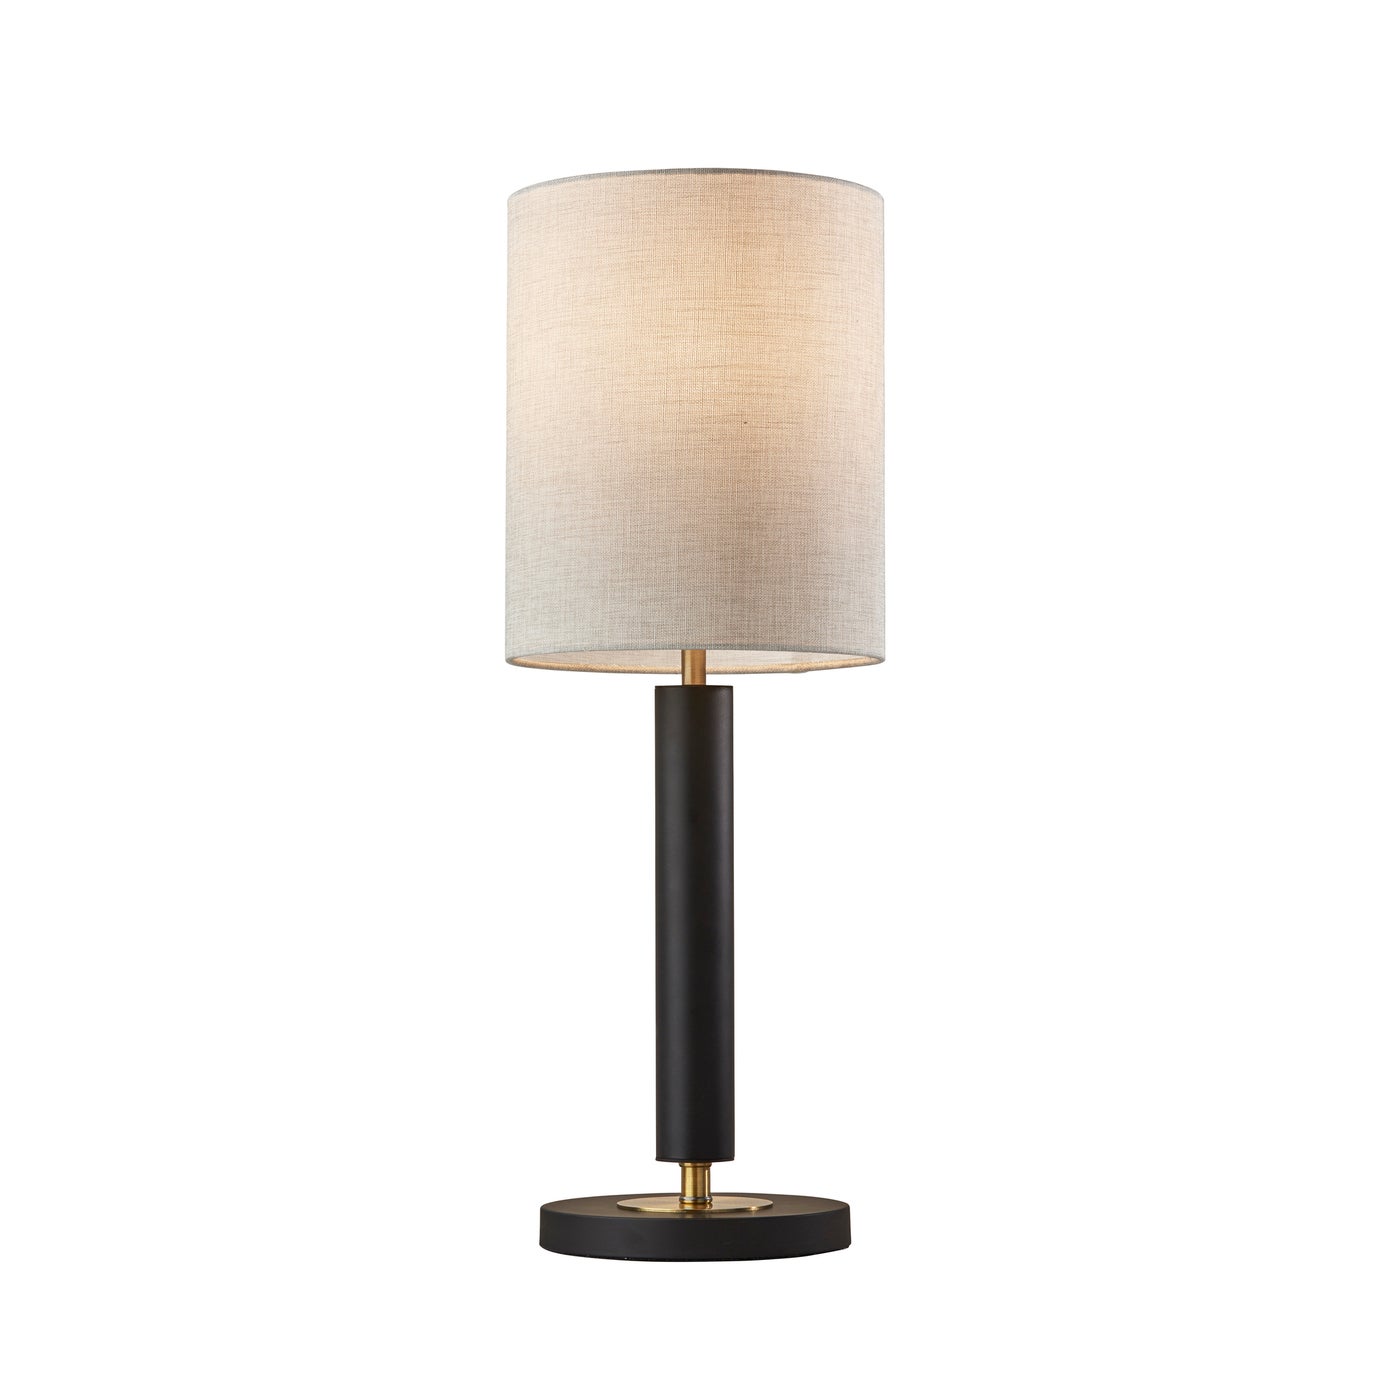 Adesso Home - 4173-01 - Table Lamp - Hollywood - Black W. Antique Brass Accents